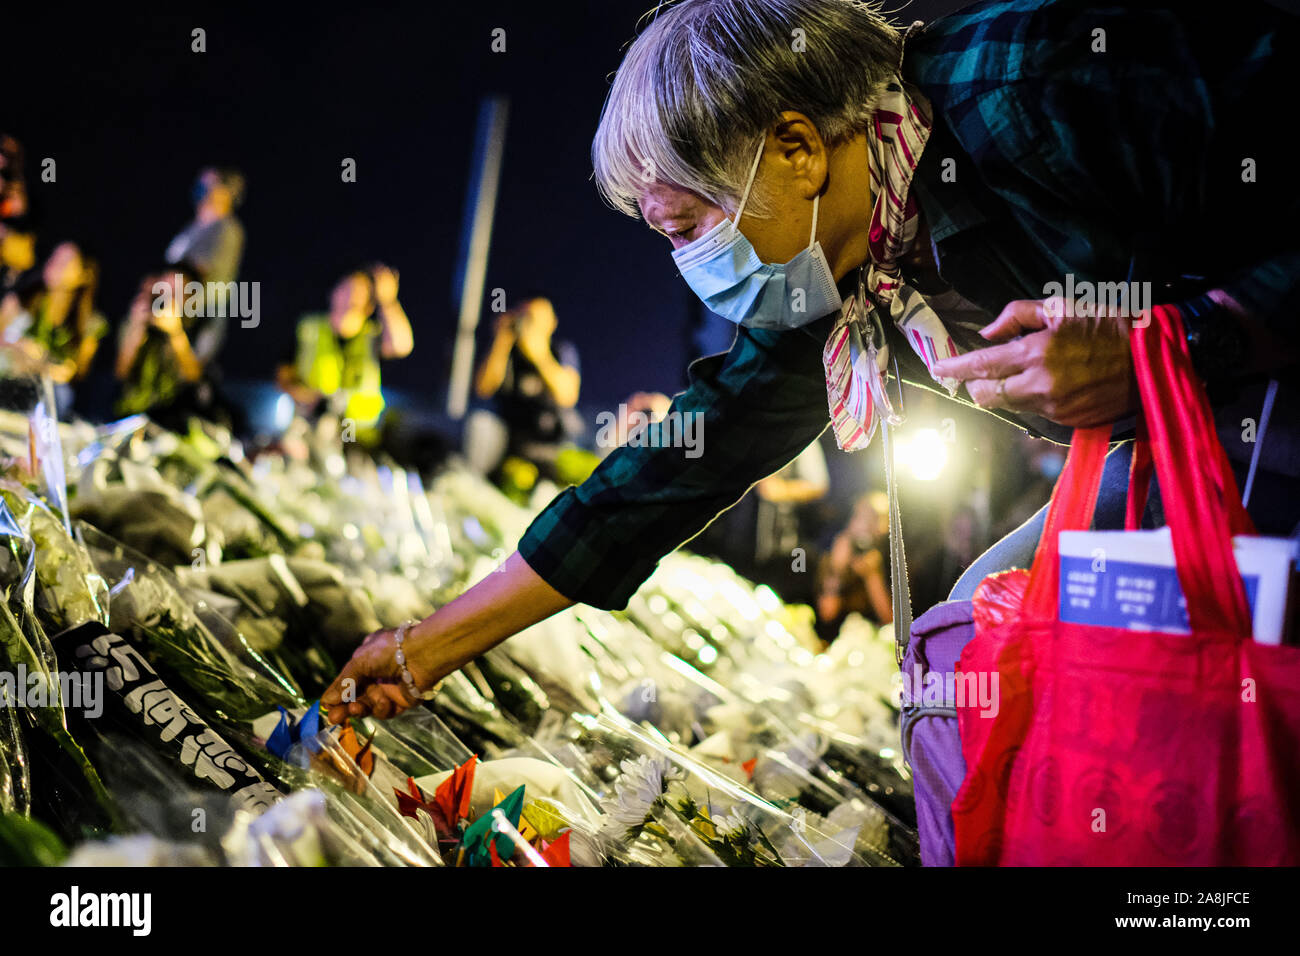 Hong Kong, China. 9th Nov, 2019. A senior woman offers flower during a memorial rally at Tamar Park in Hong Kong to mourn the death of a 22 years old university student Alex Chow Tsz Lok, who died from a serious brain injury during a fall on November 4th as police skirmished with demonstrators last weekend. He was left in critical condition and died after suffering a cardiac arrest on Friday. Credit: Keith Tsuji/ZUMA Wire/Alamy Live News Stock Photo